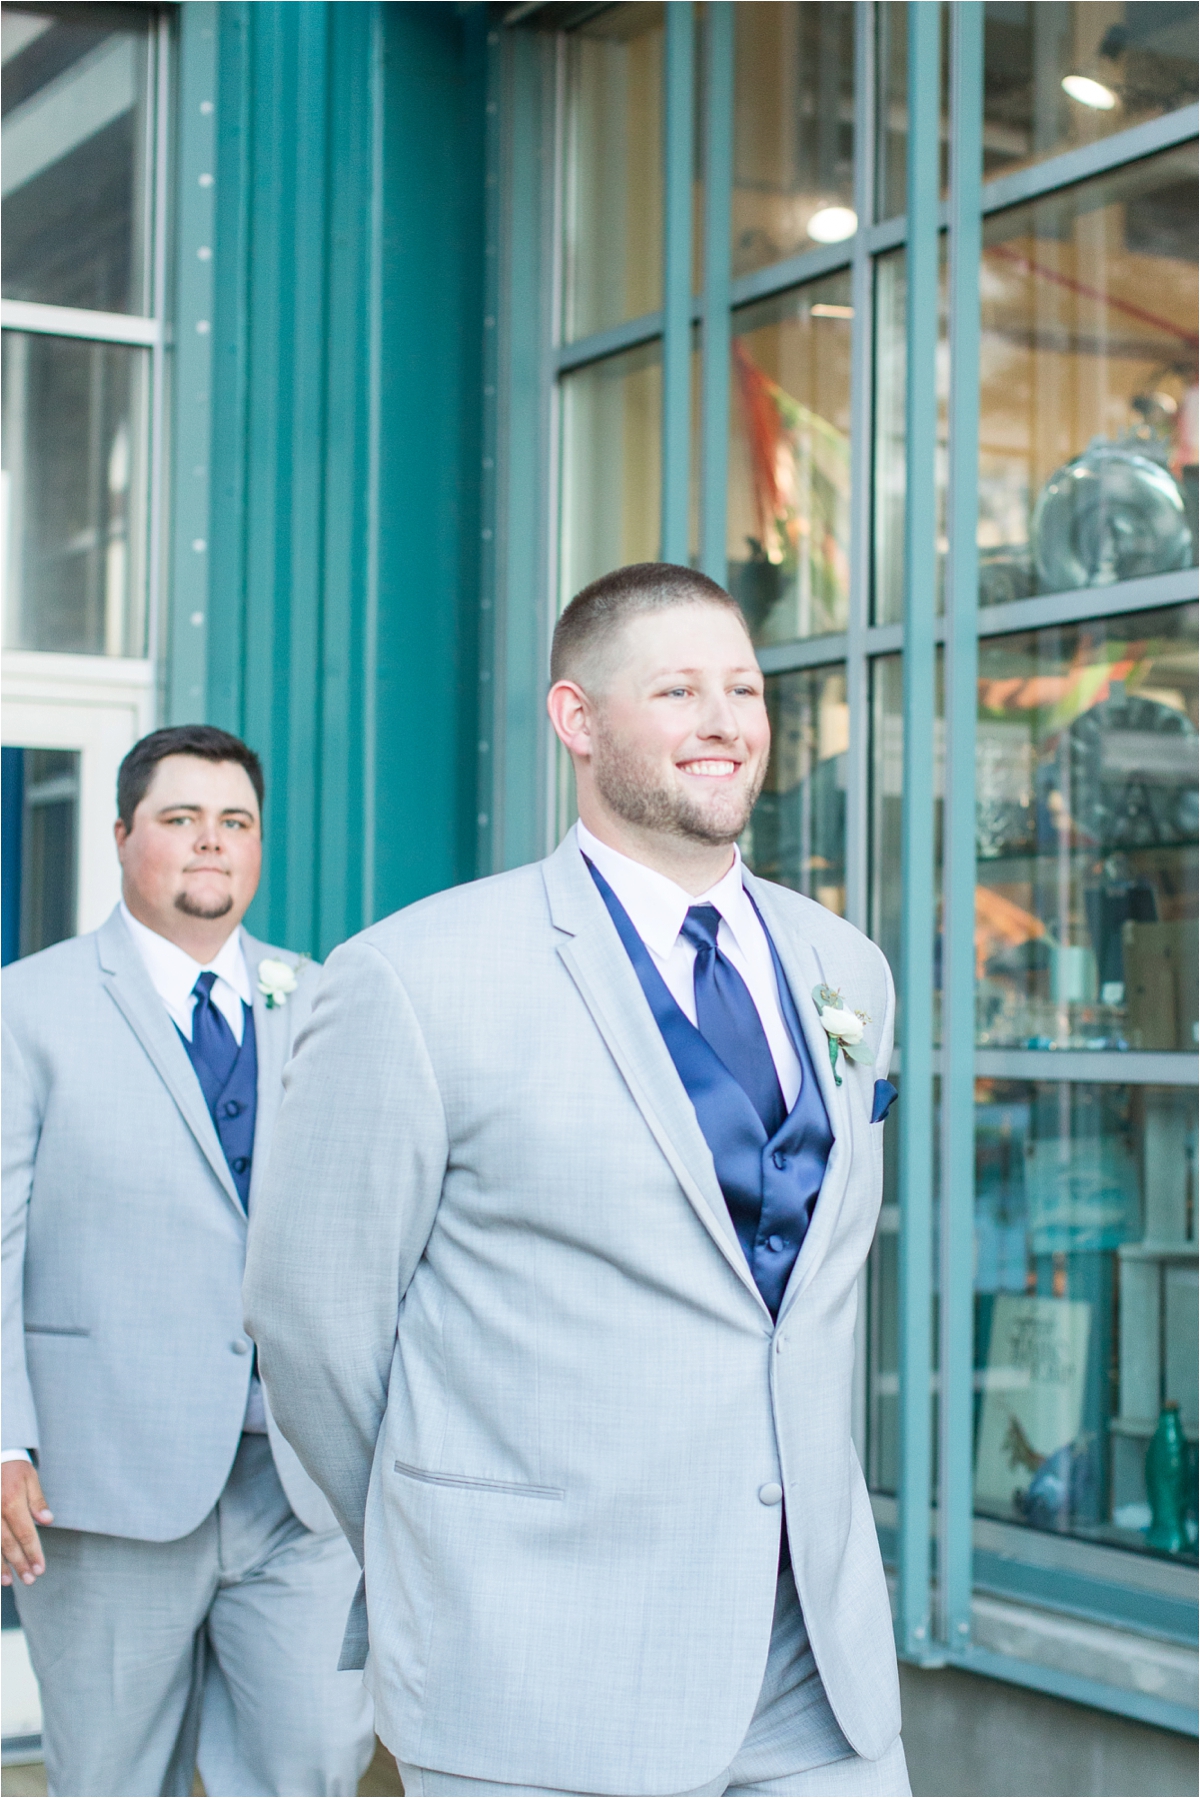 groom-first-look-at the end of the aisle-navy-blue-wedding-vest-tie